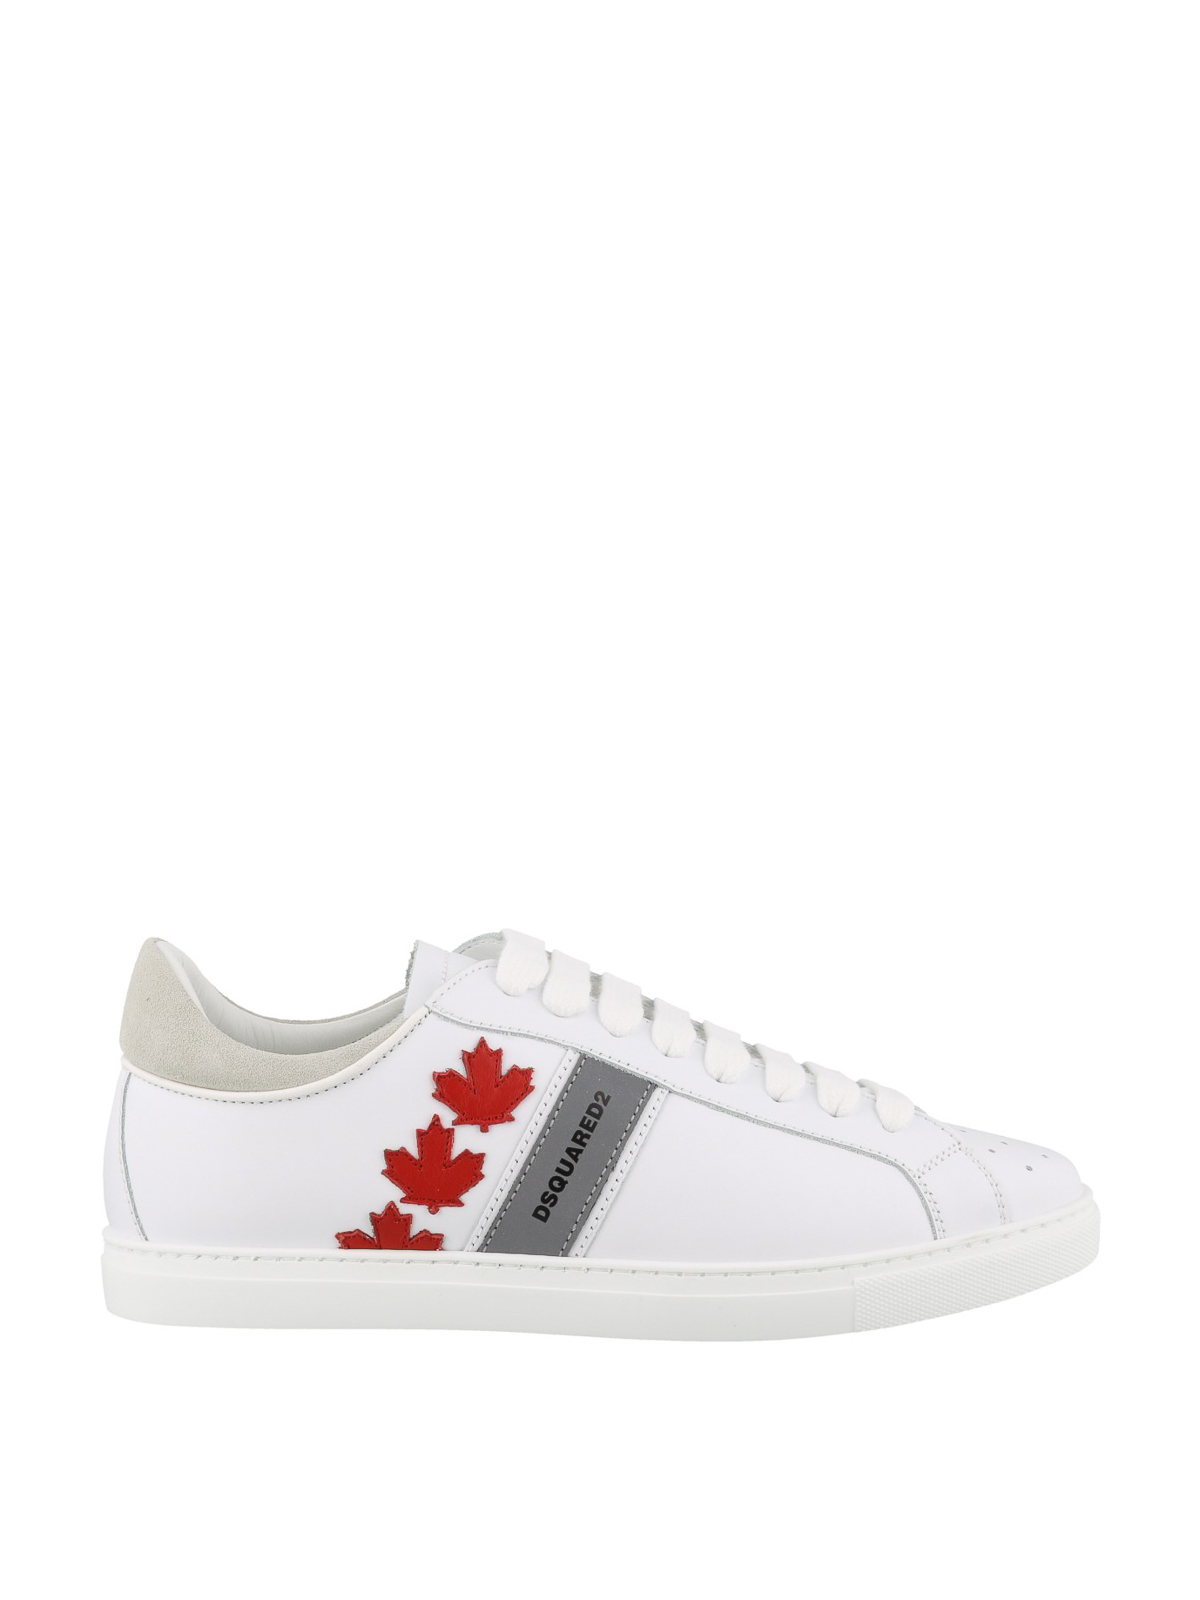 Canadian Team leather sneakers 